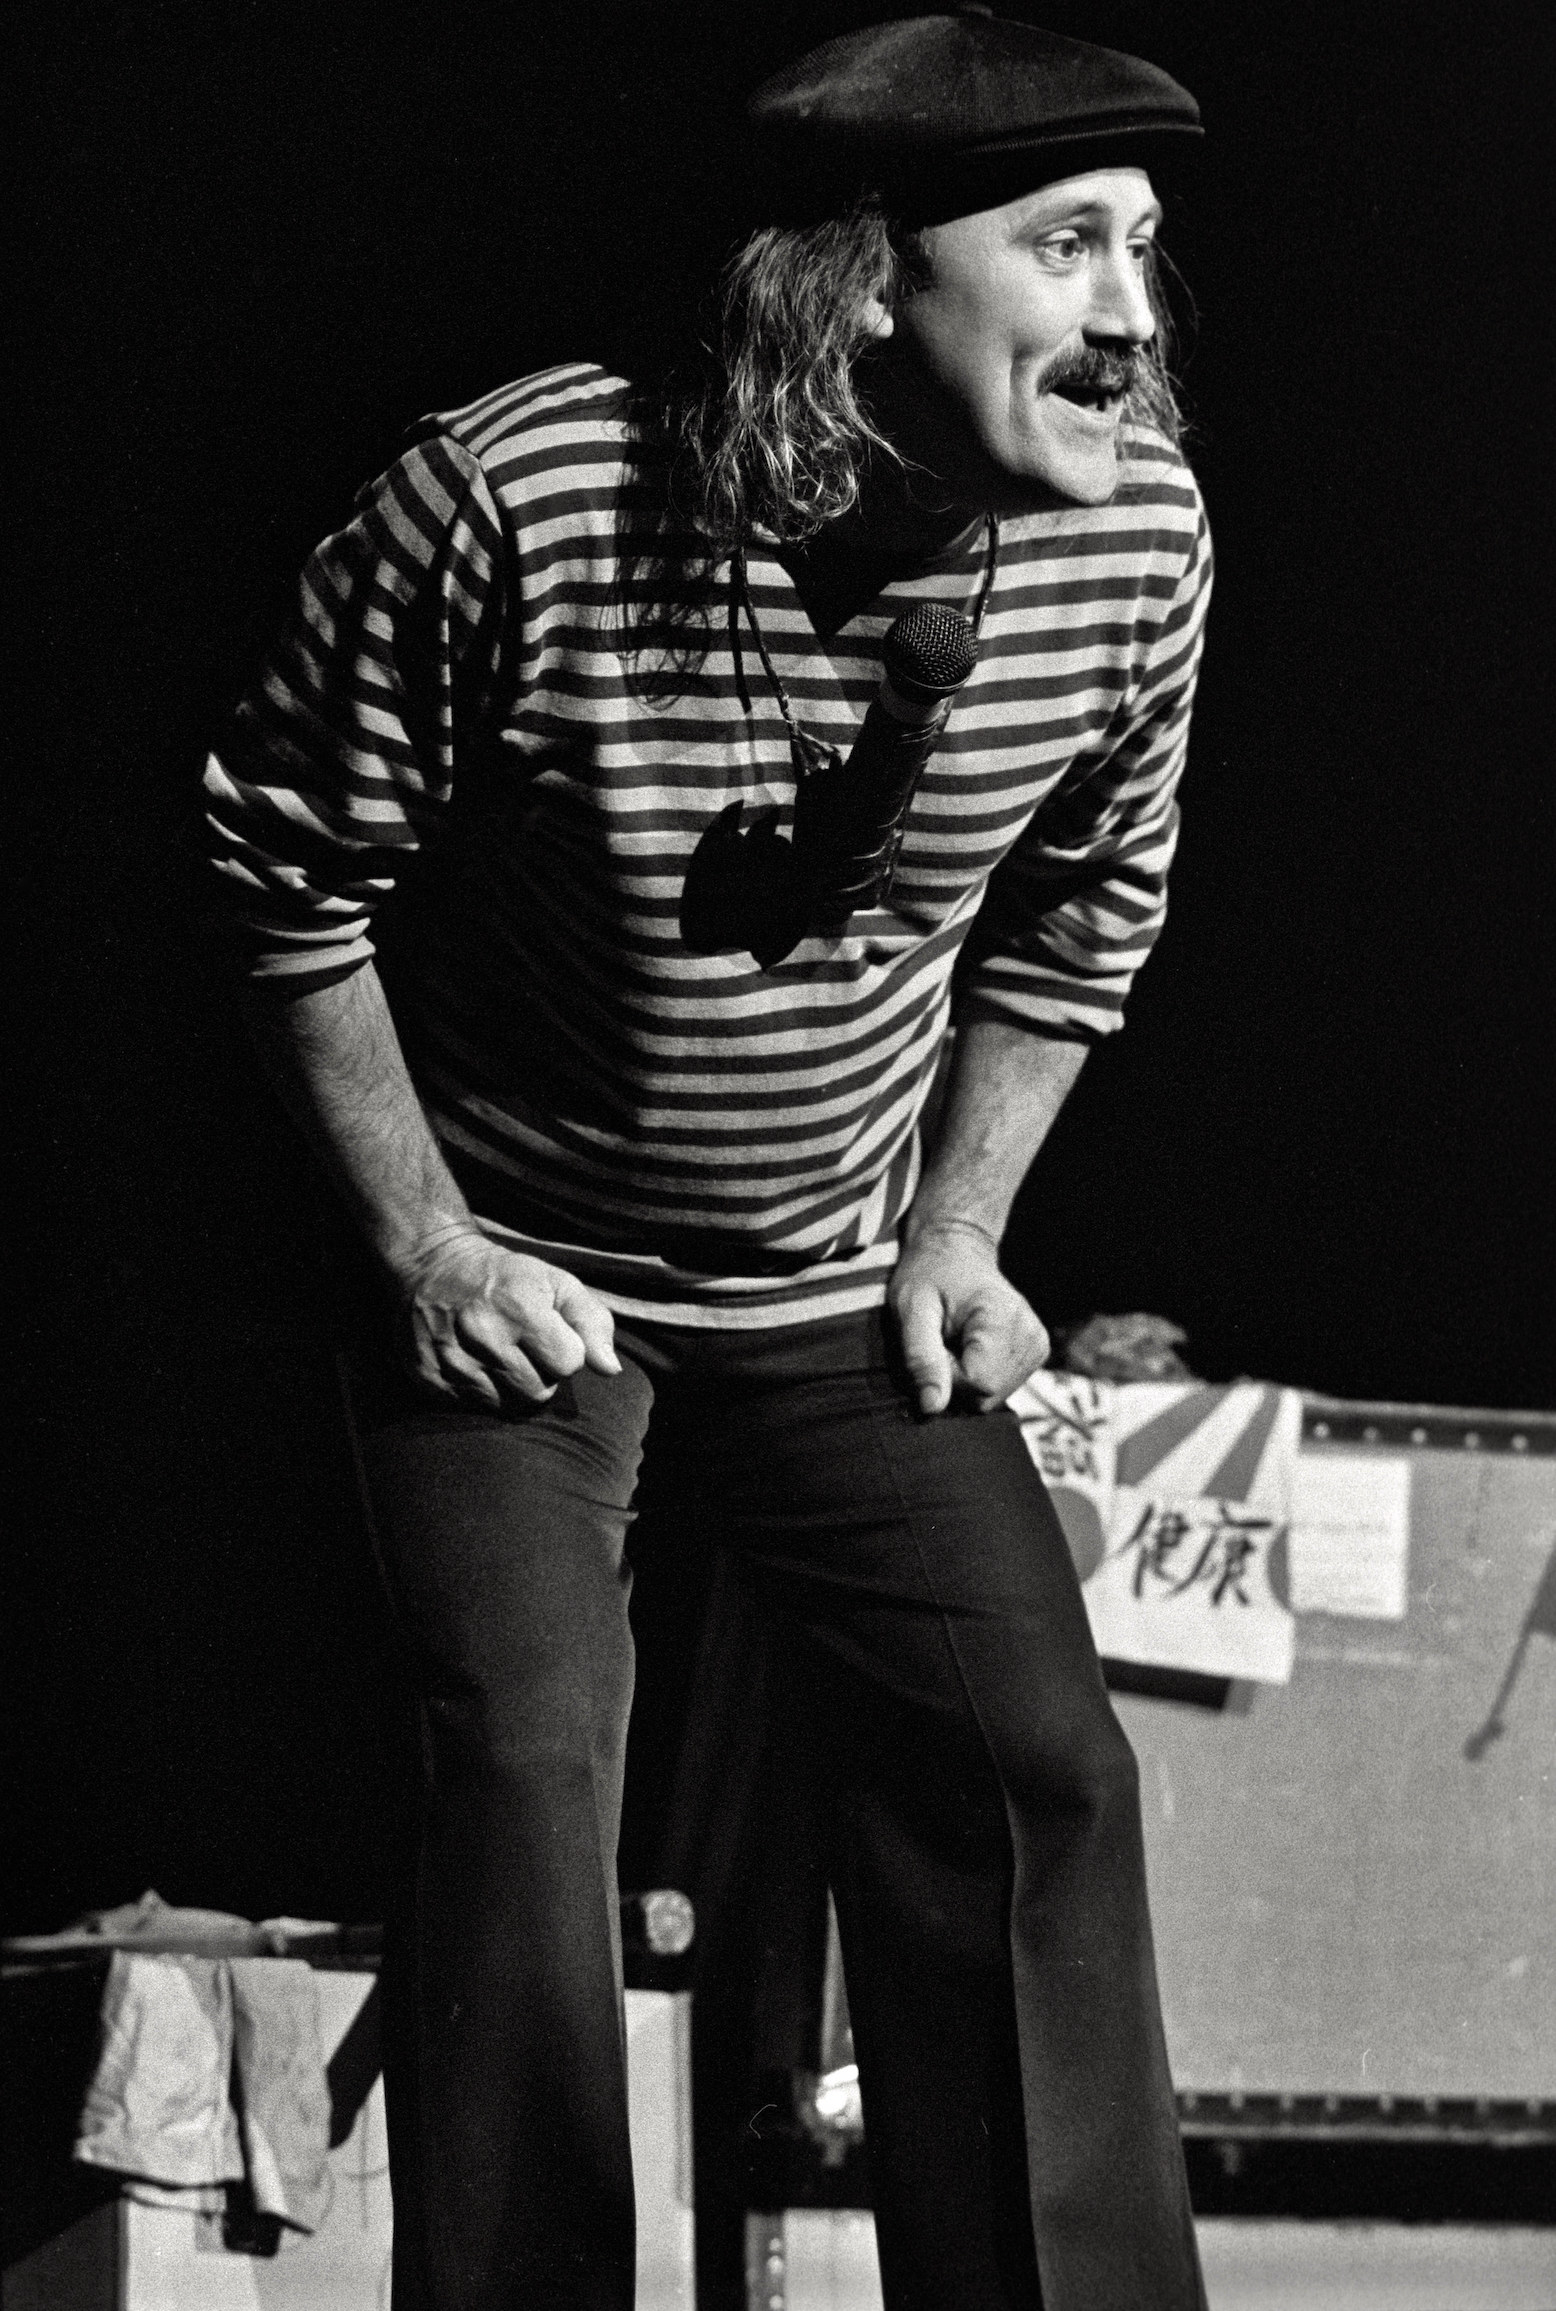 Gallagher in a beret and stripped long sleeve on stage